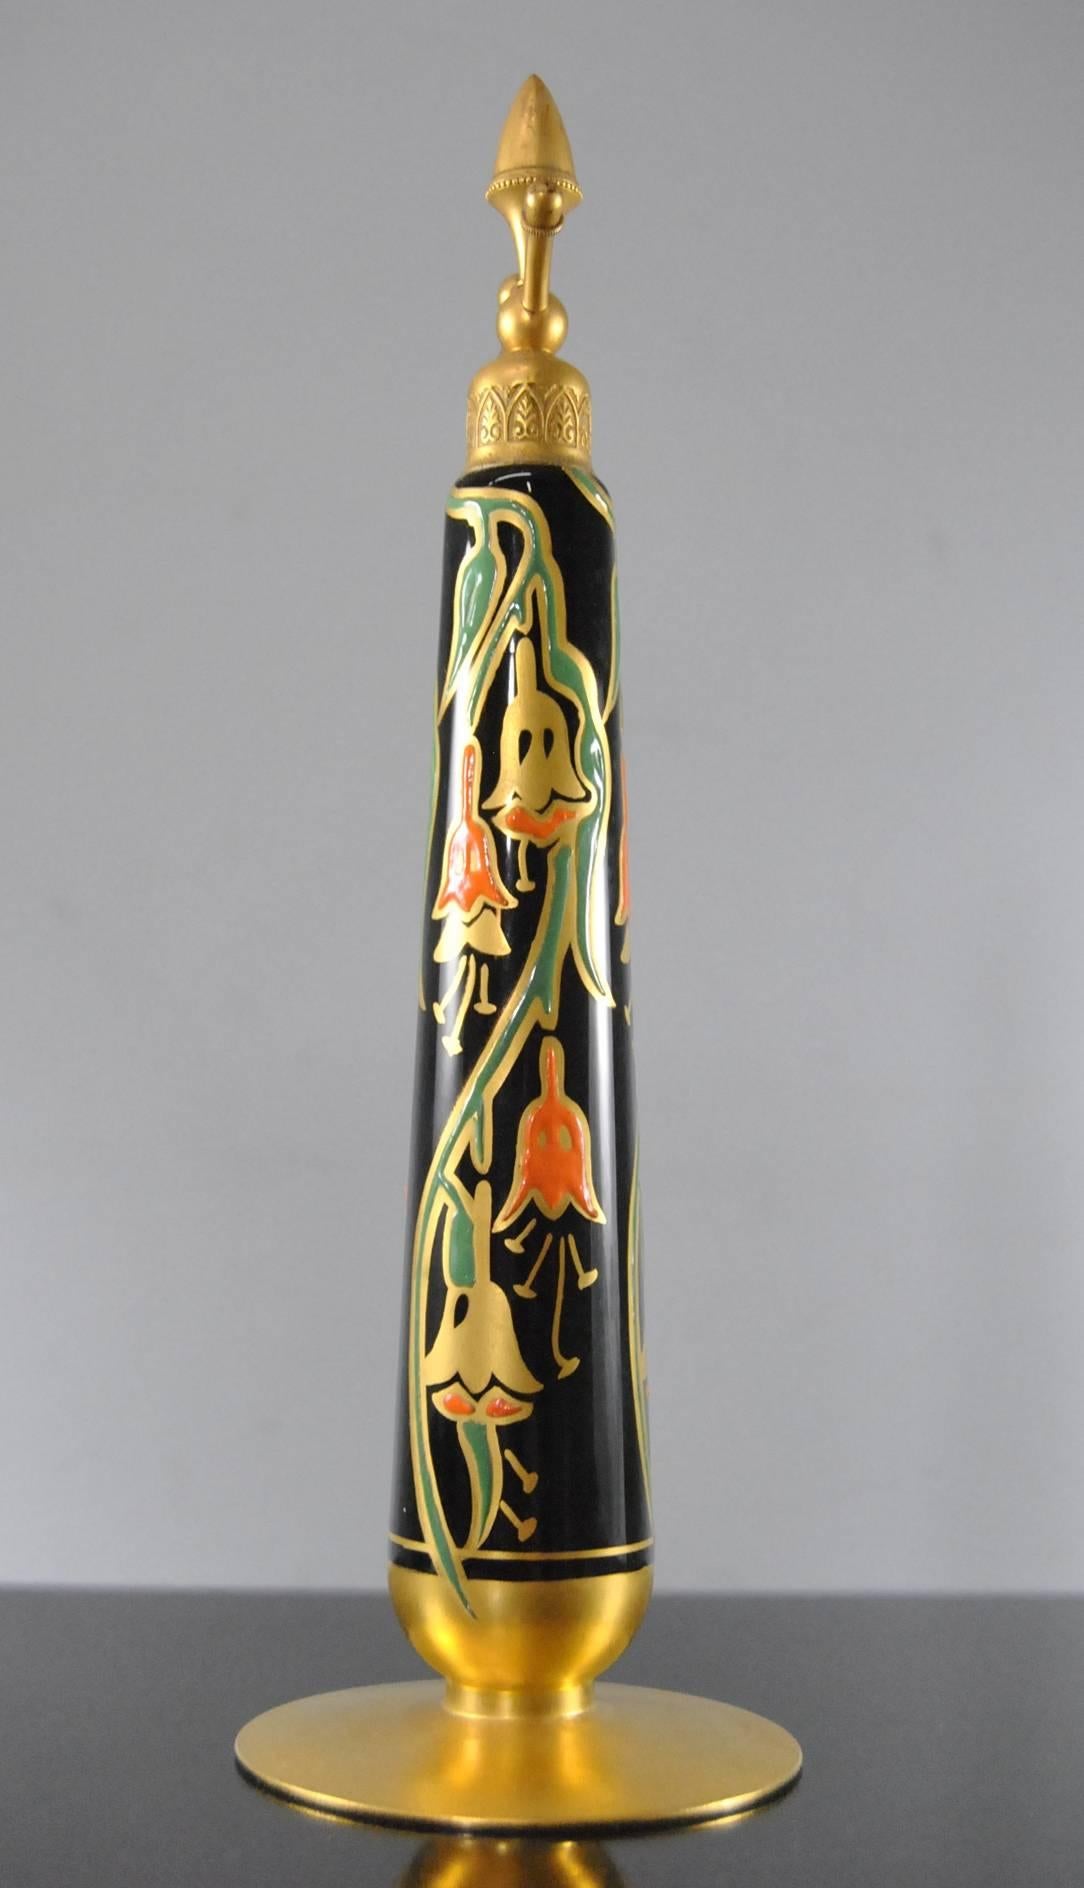 An Art Deco style atomizer perfume bottle by DeVilbiss.  This beautiful bottle features a black body with gold, orange and green enameled stylized flowers and a small acorn finial on top.  This is a beautiful statuesque bottle.  The atomizer bulb is